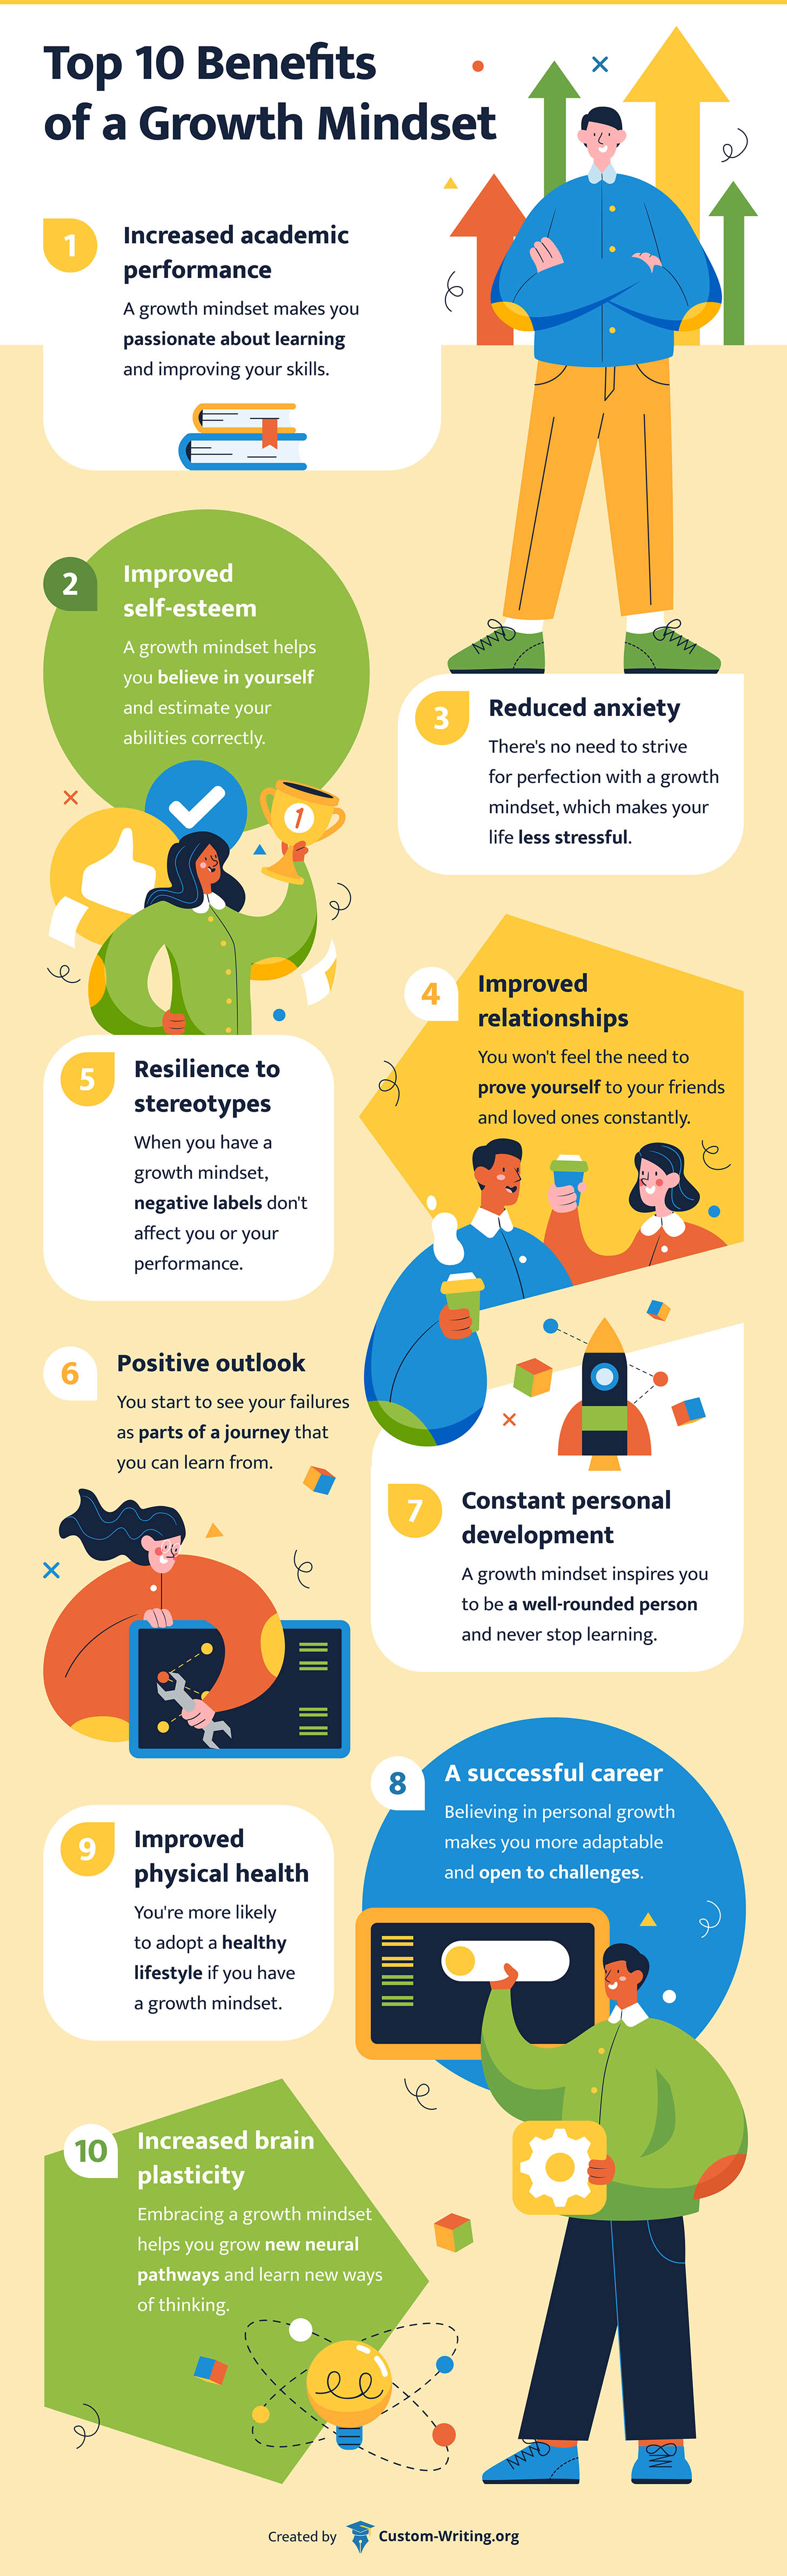 The infographic shows various benefits of a growth mindset.